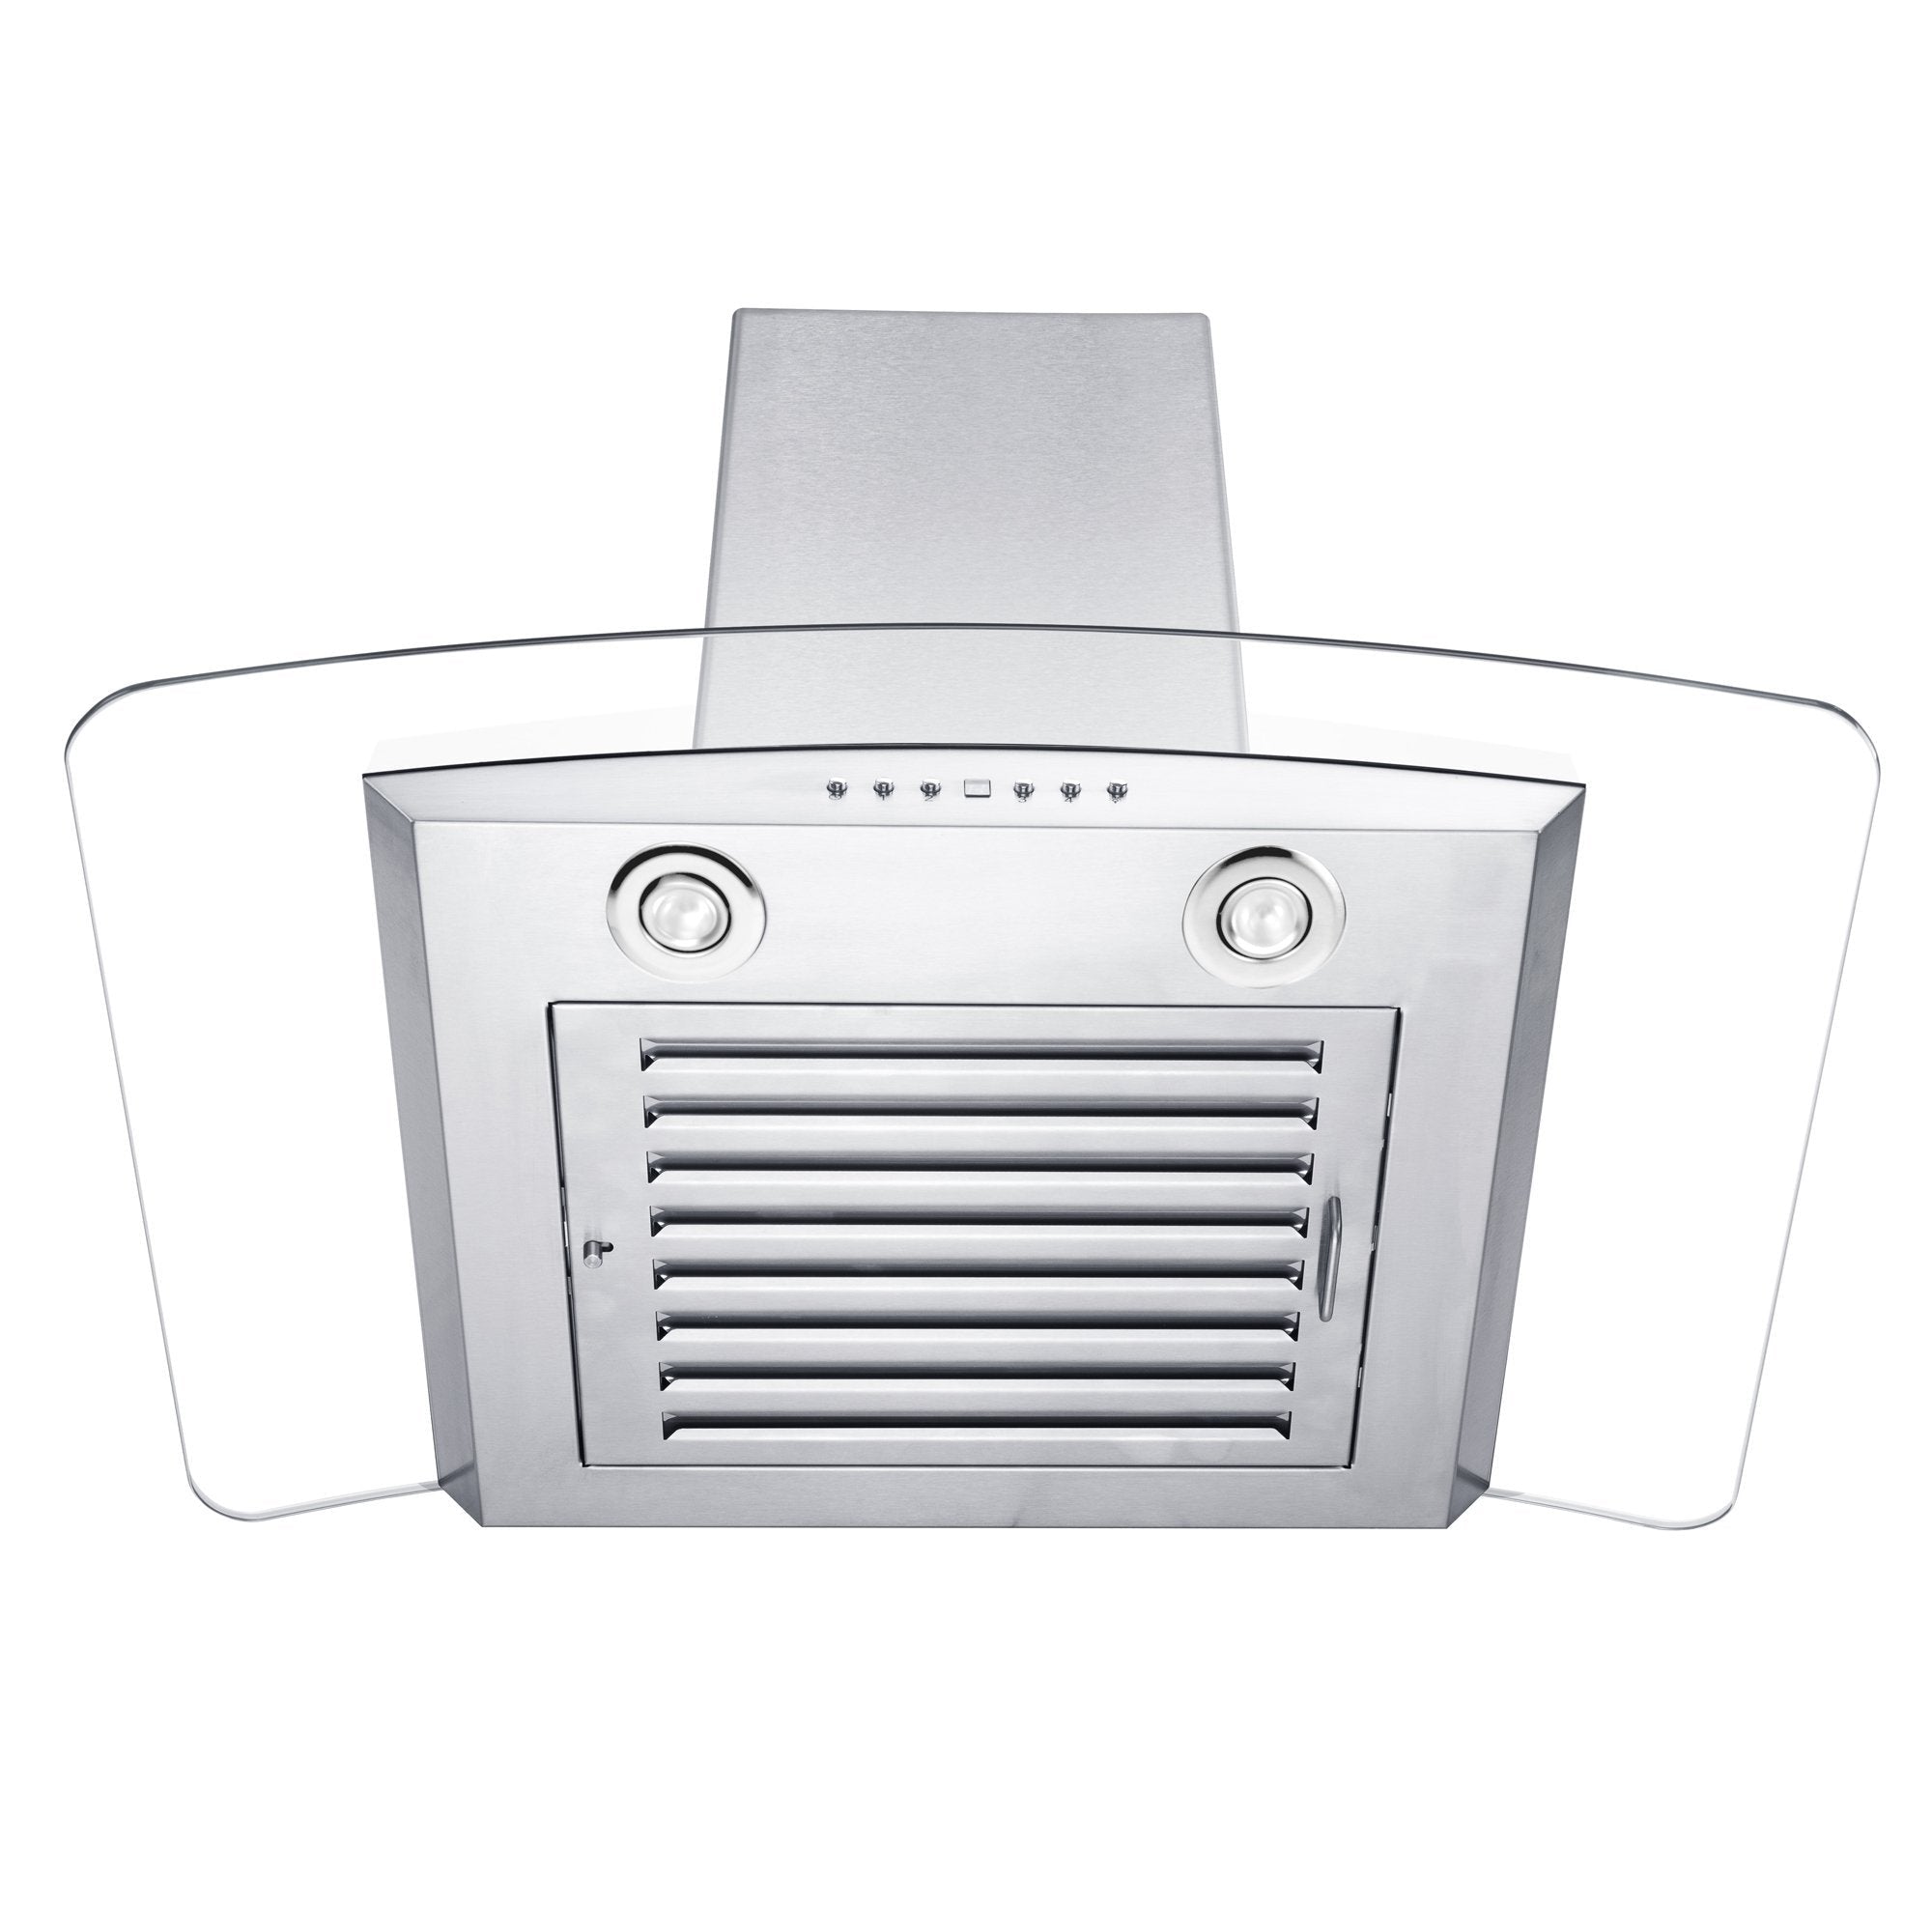 ZLINE Convertible Vent Wall Mount Range Hood in Stainless Steel & Glass with Crown Molding (KZCRN) direct under showing LED lighting and baffle filter.